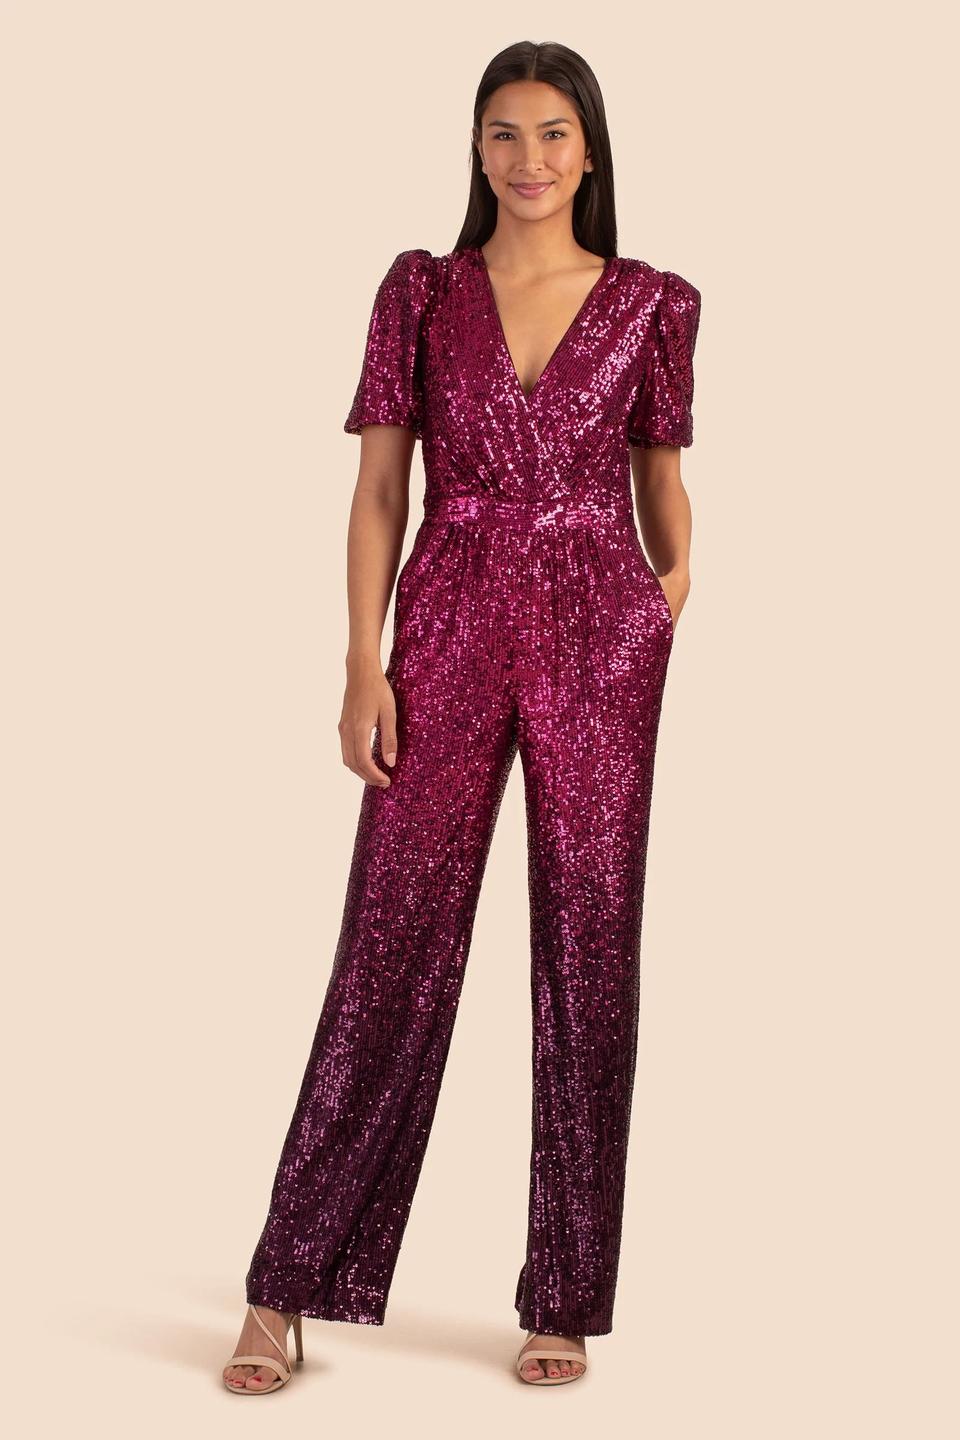 40 Winter Wedding Guest Dresses Perfect for the 2022 Season